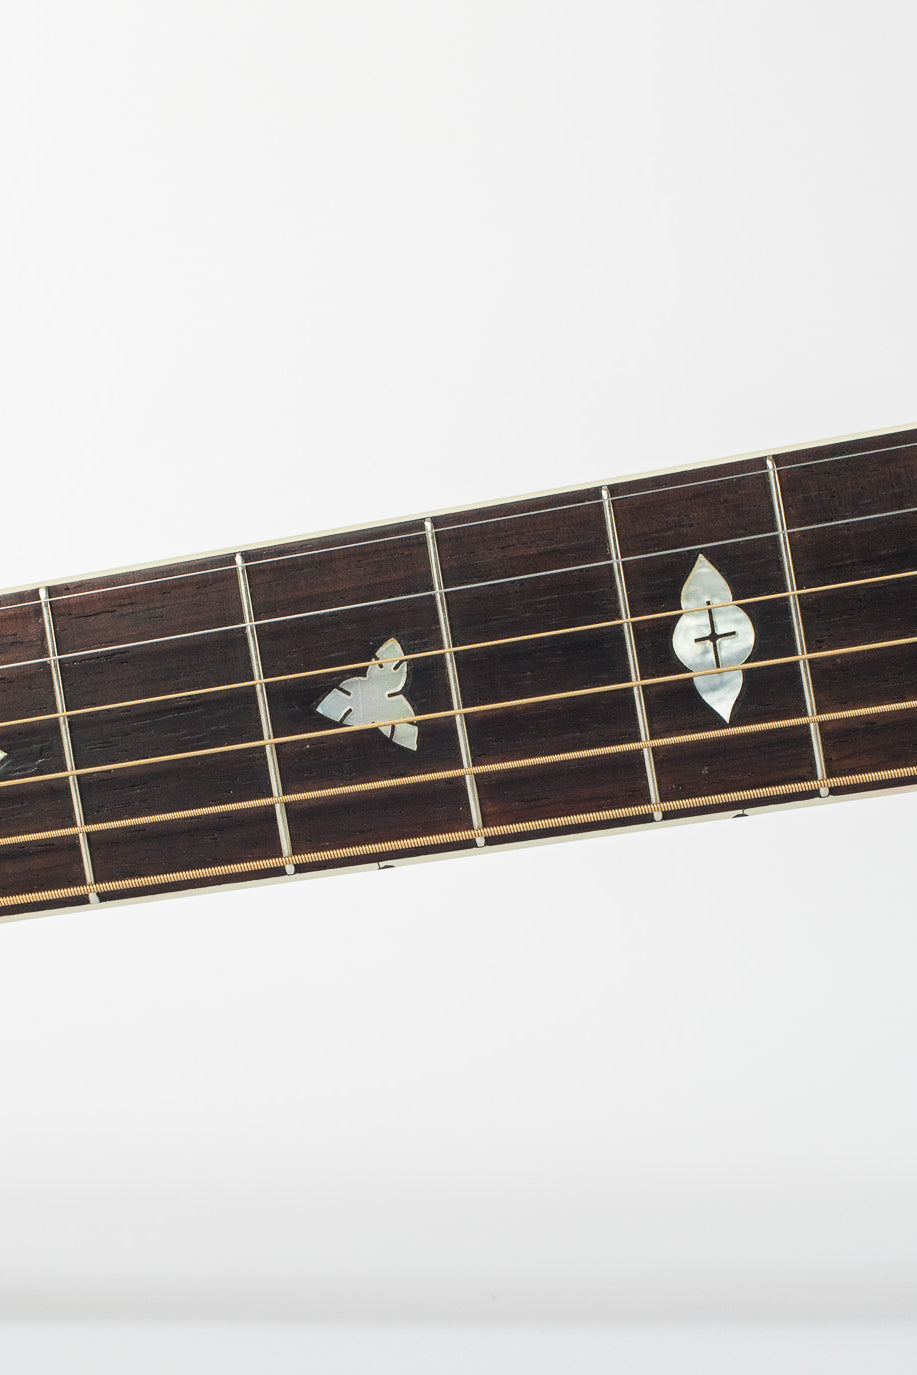 1928 Gibson Nick Lucas Special, fretboard inlays